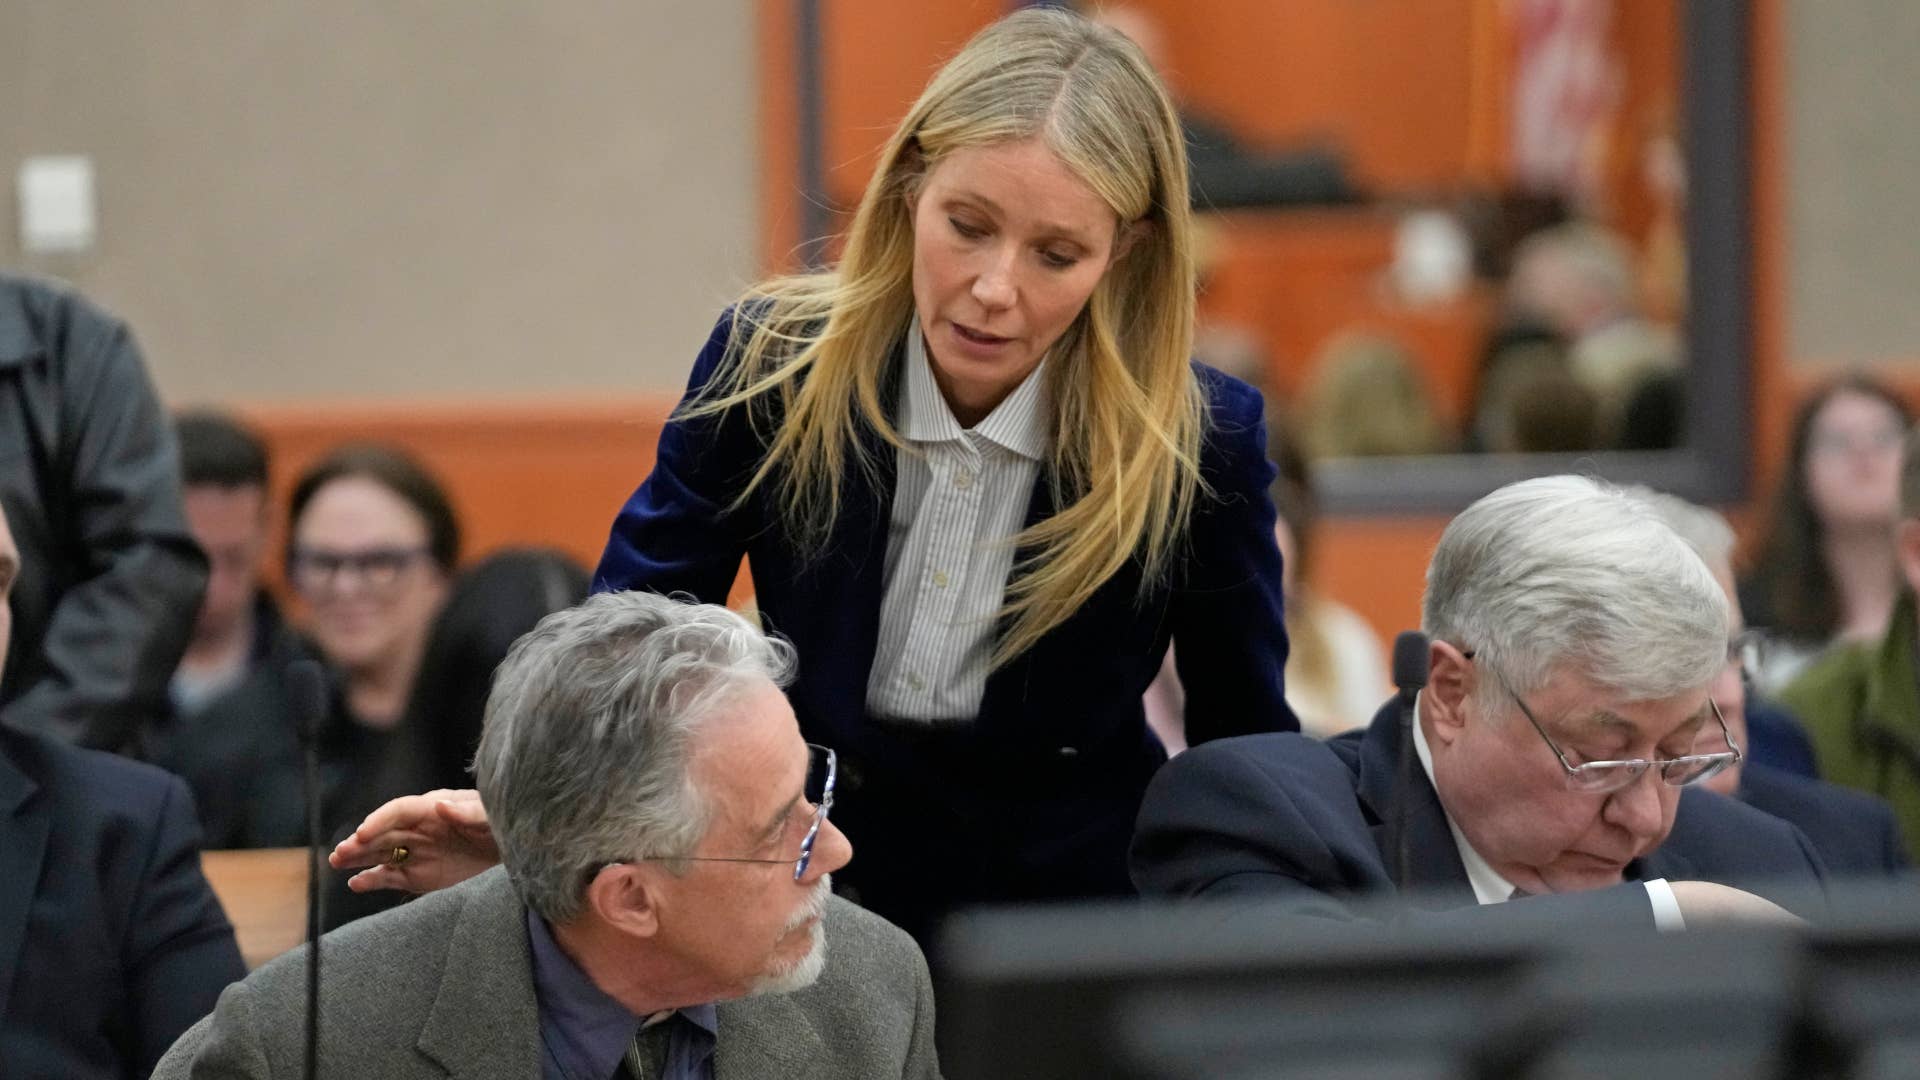 Gwyneth Paltrow pictured in a Park City courtroom